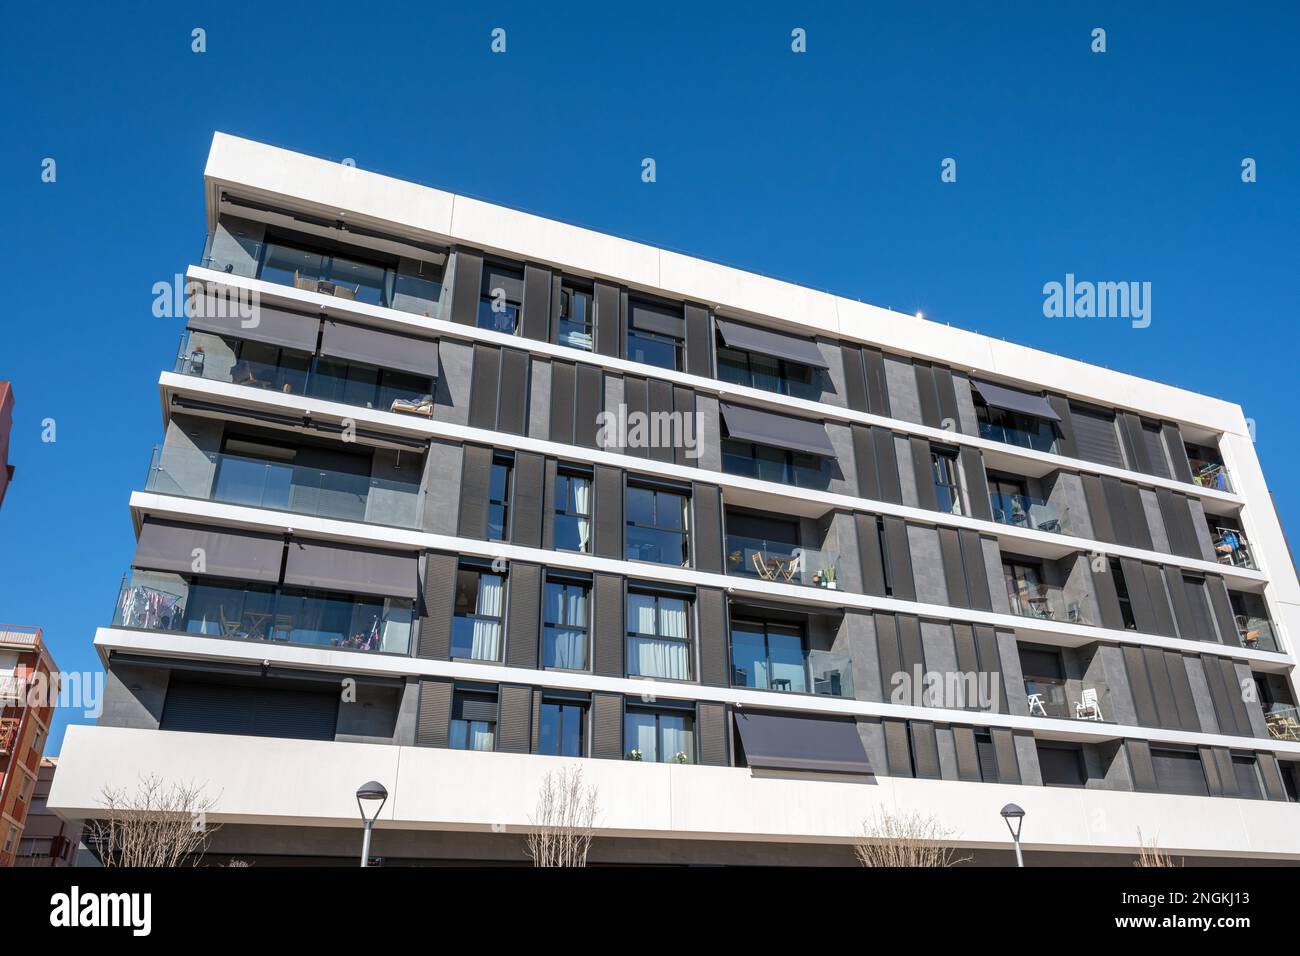 The facade of a modern white apartment building seen in Barcelona, Spain Stock Photo